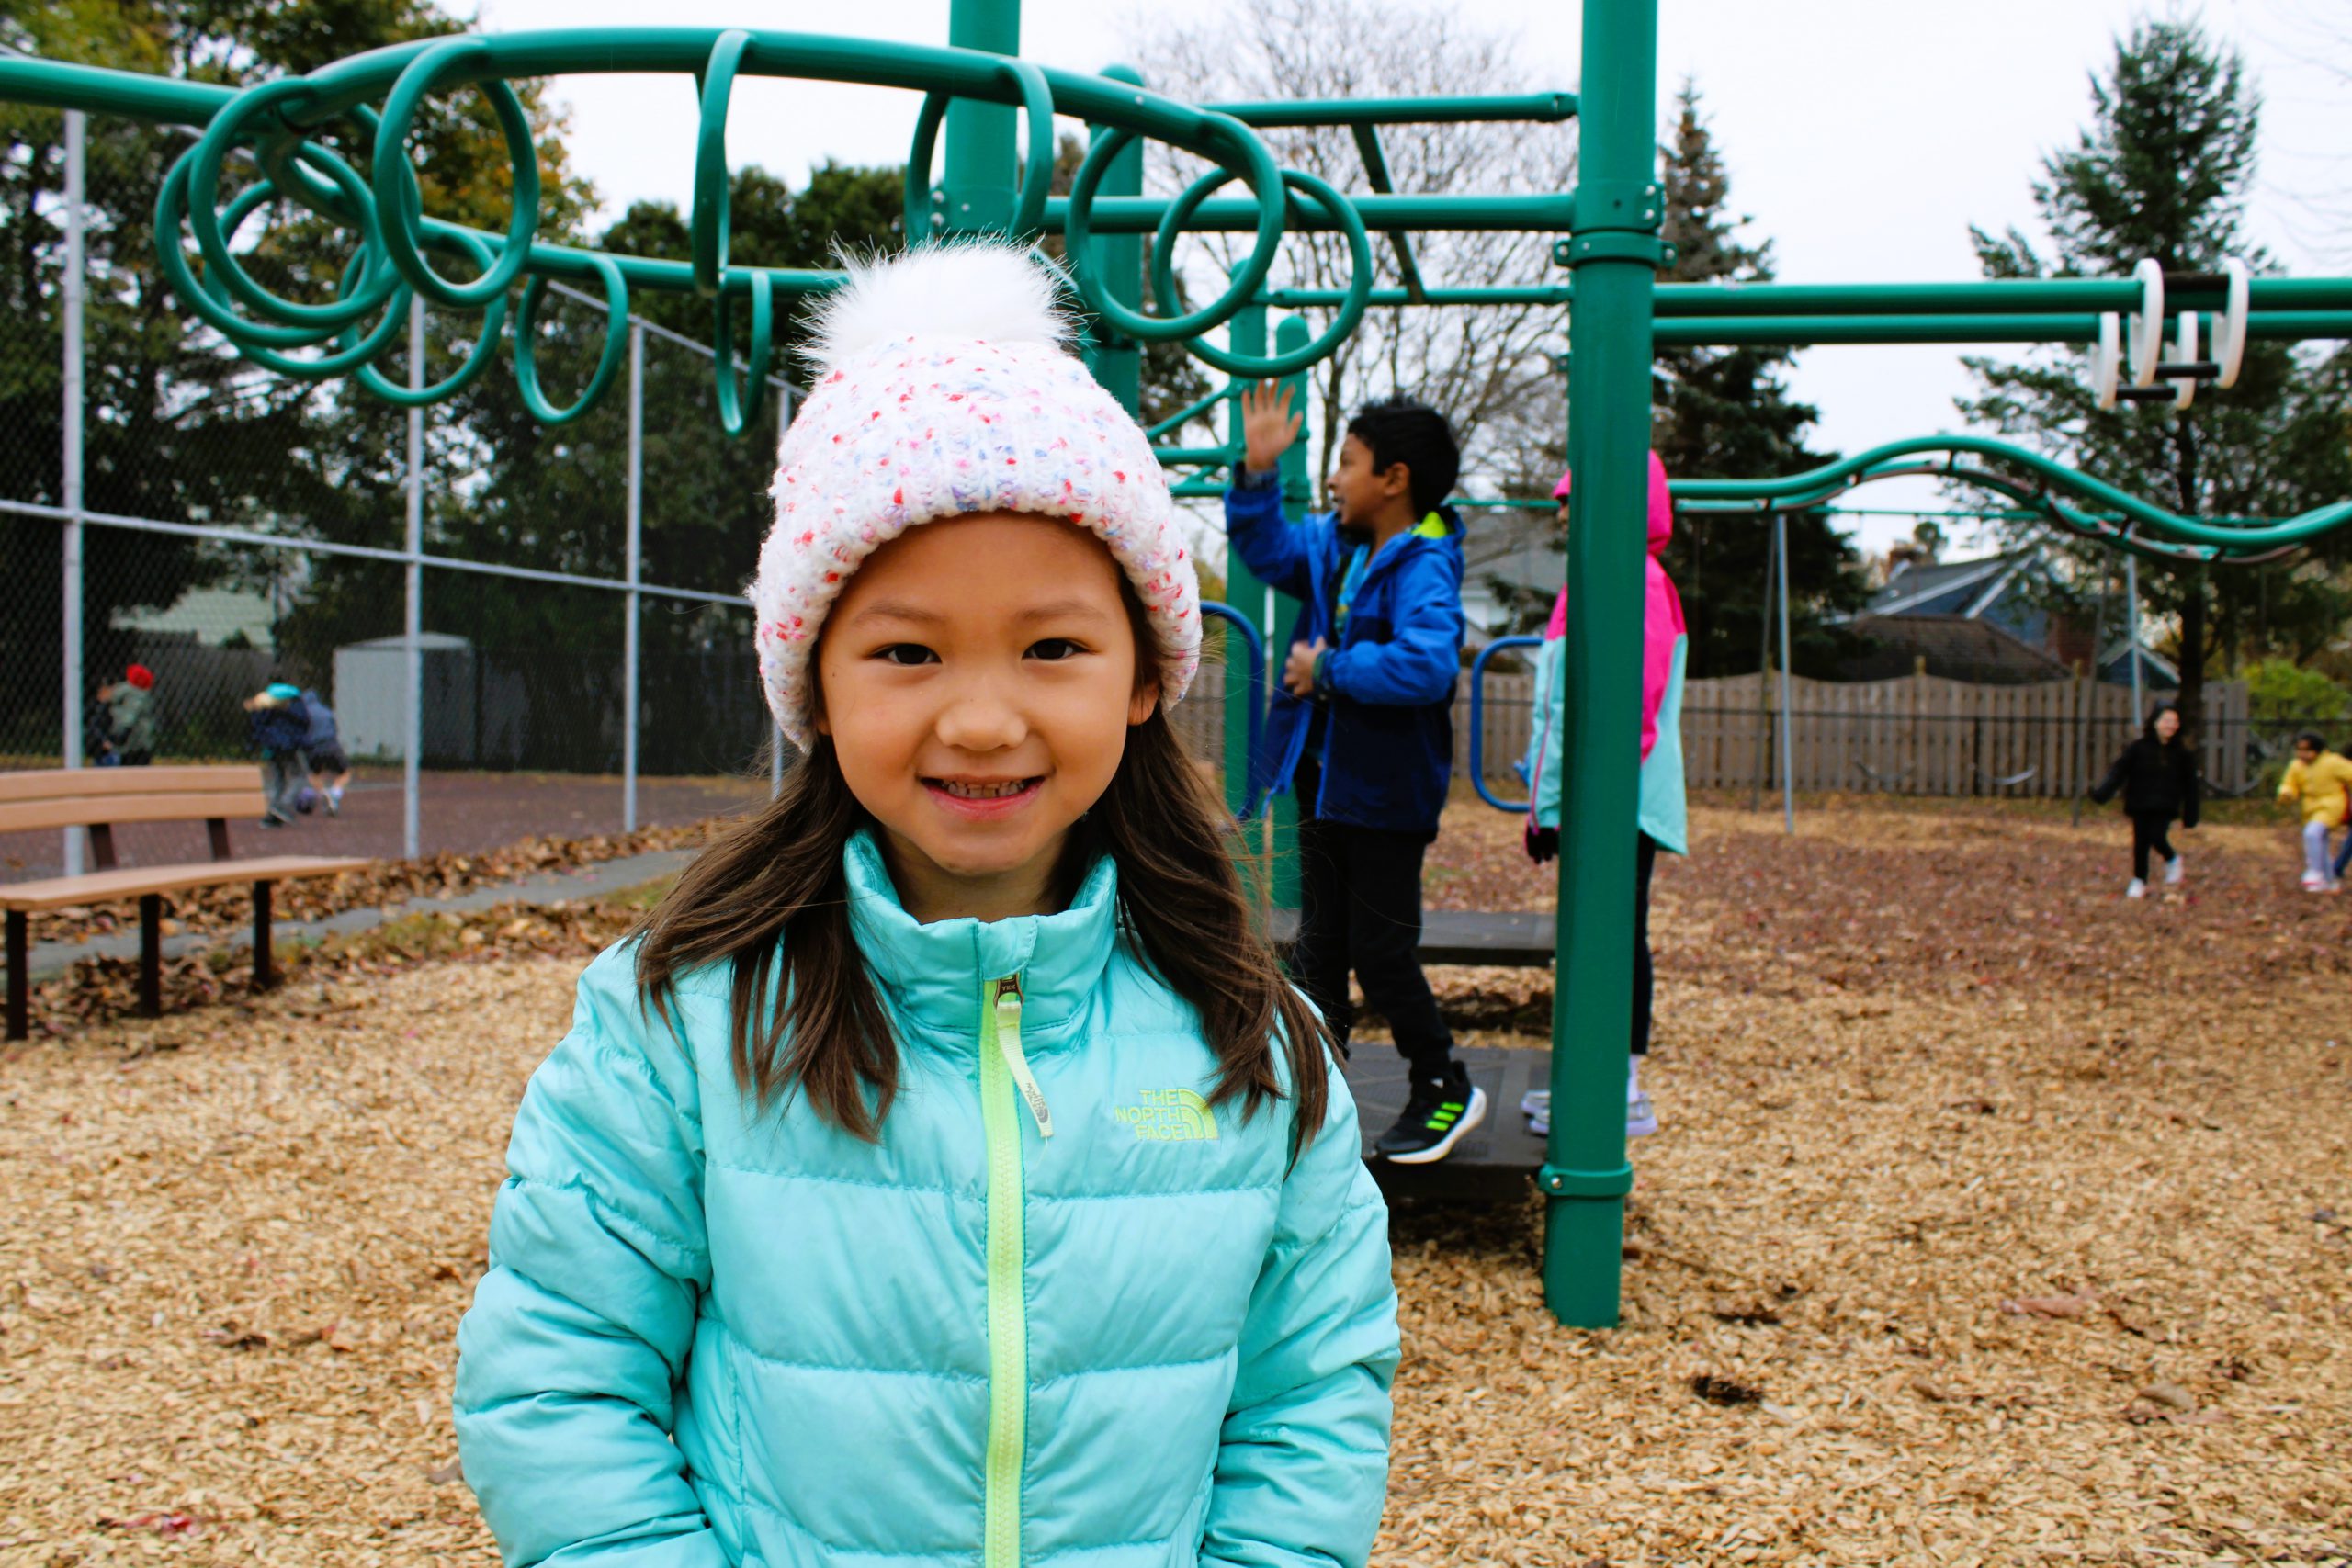 Image of student posing during recess.